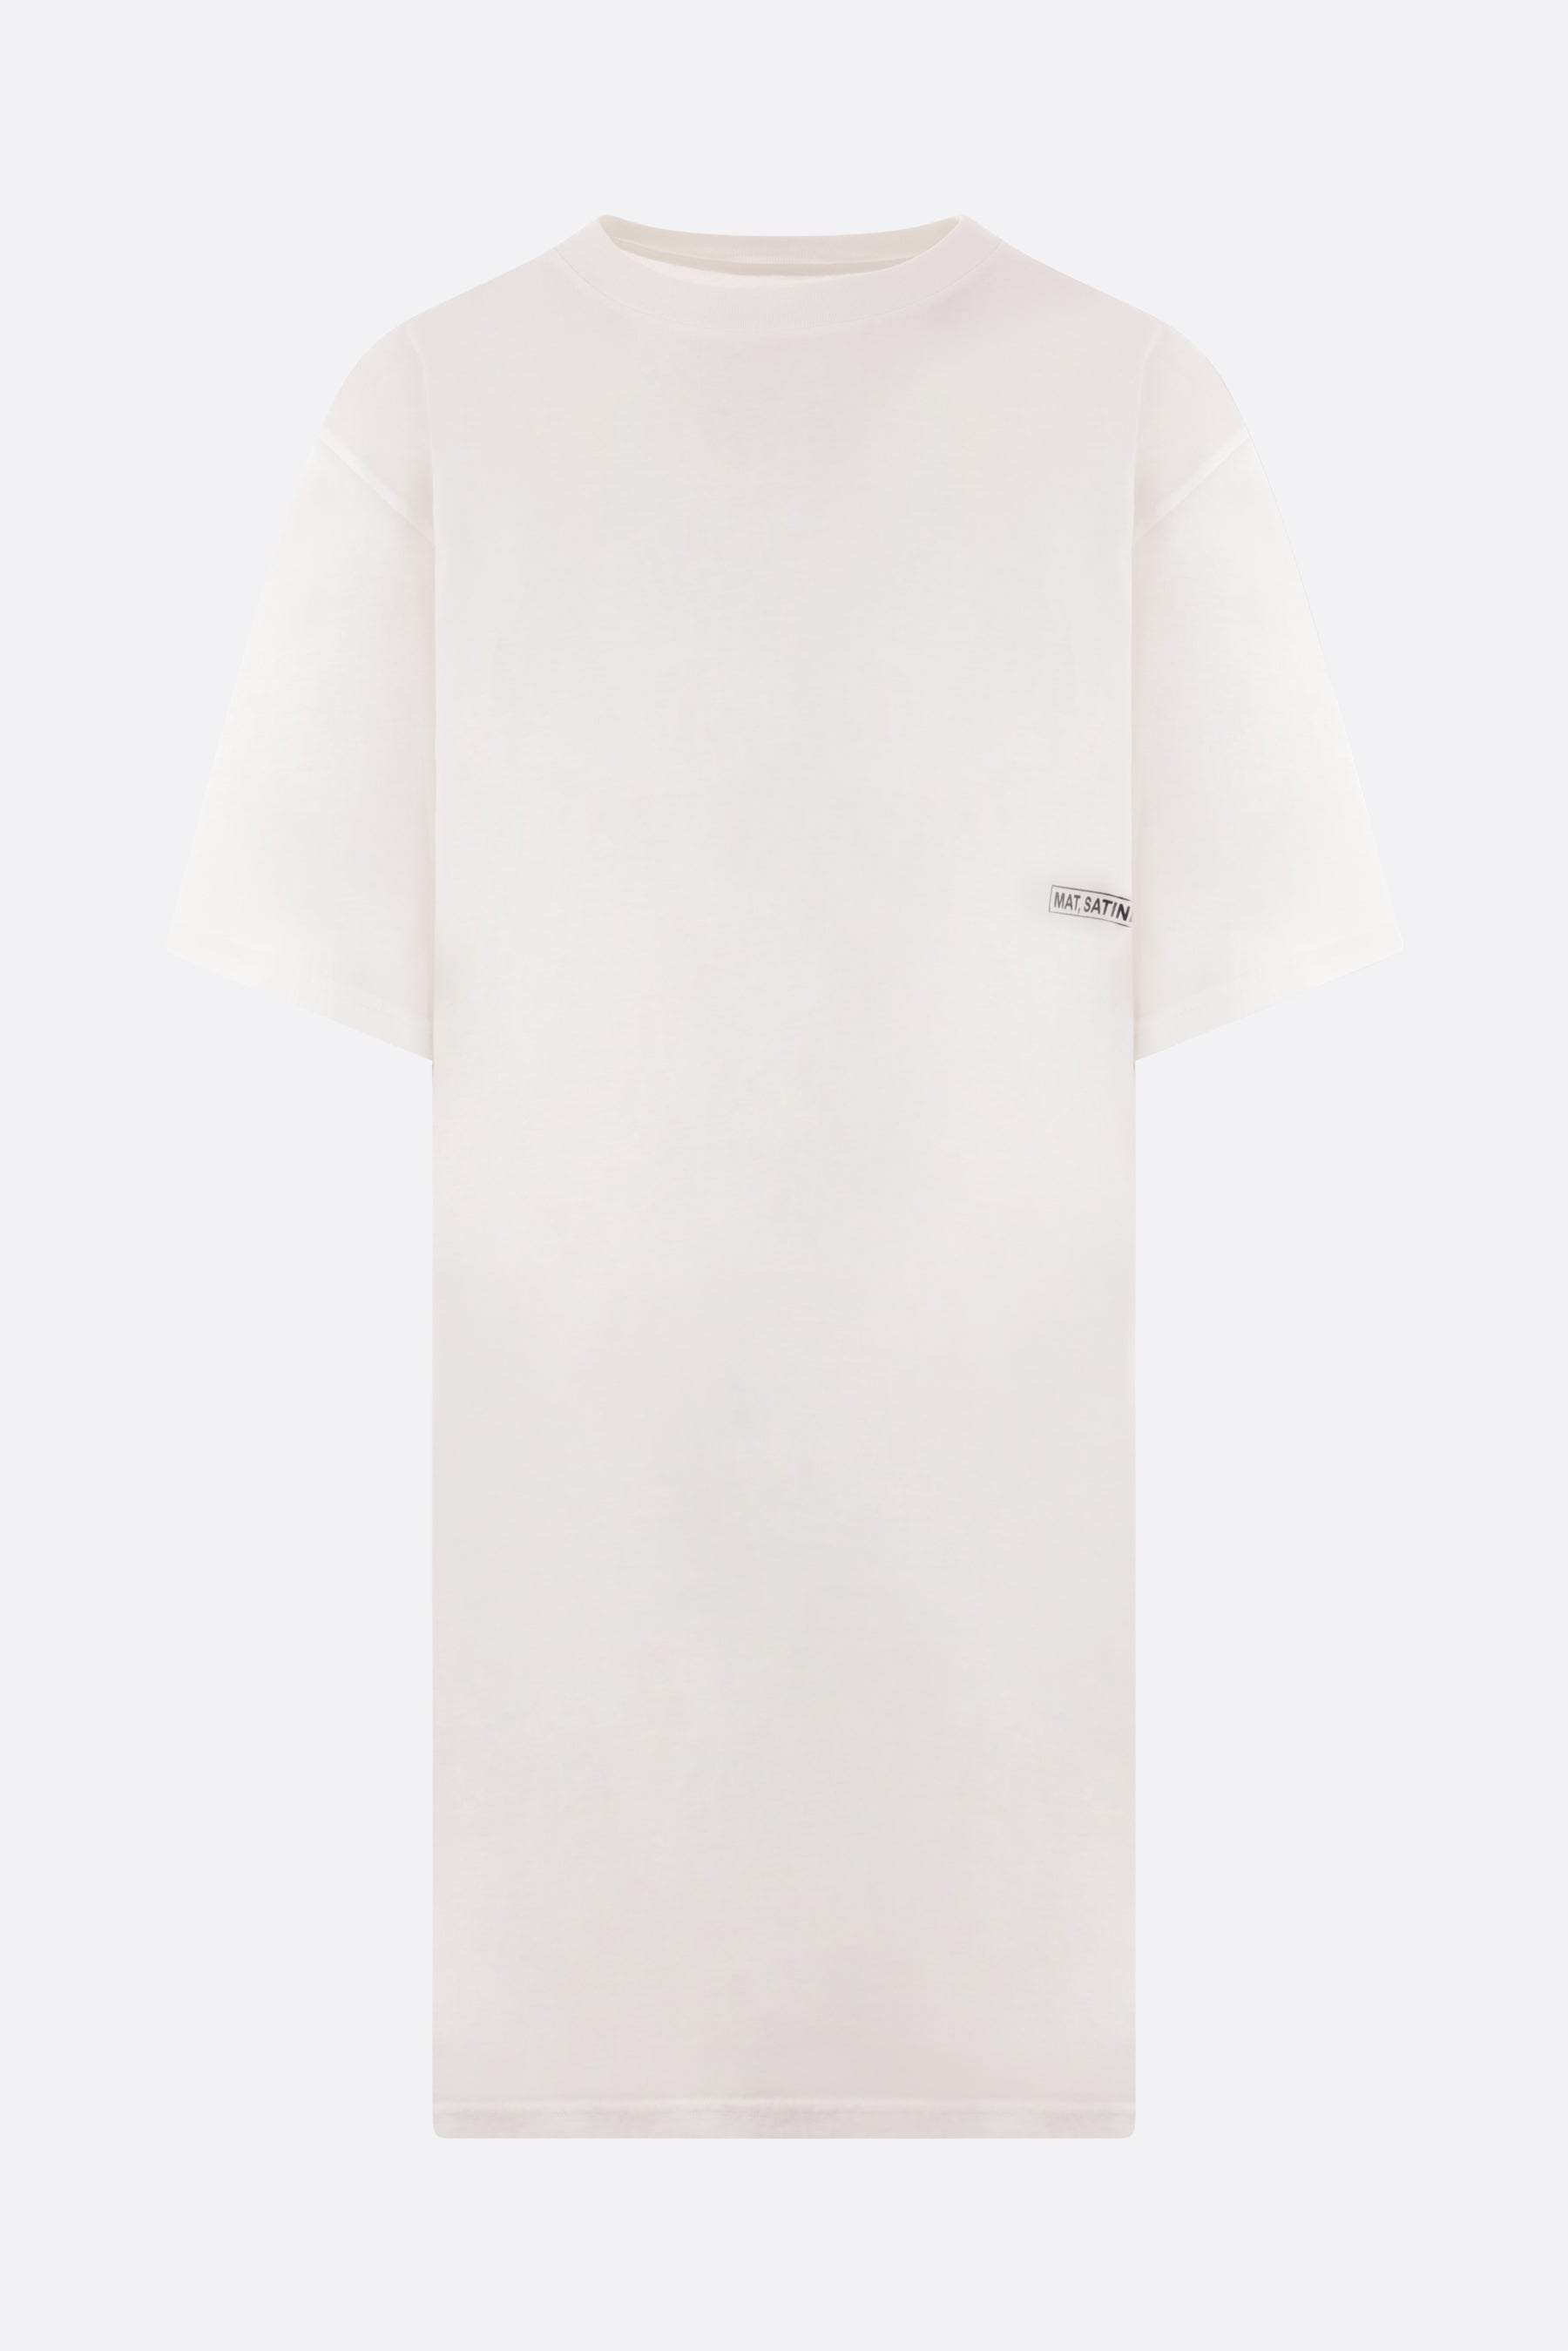 t-shirt extra-lunga in cotone stampa logo